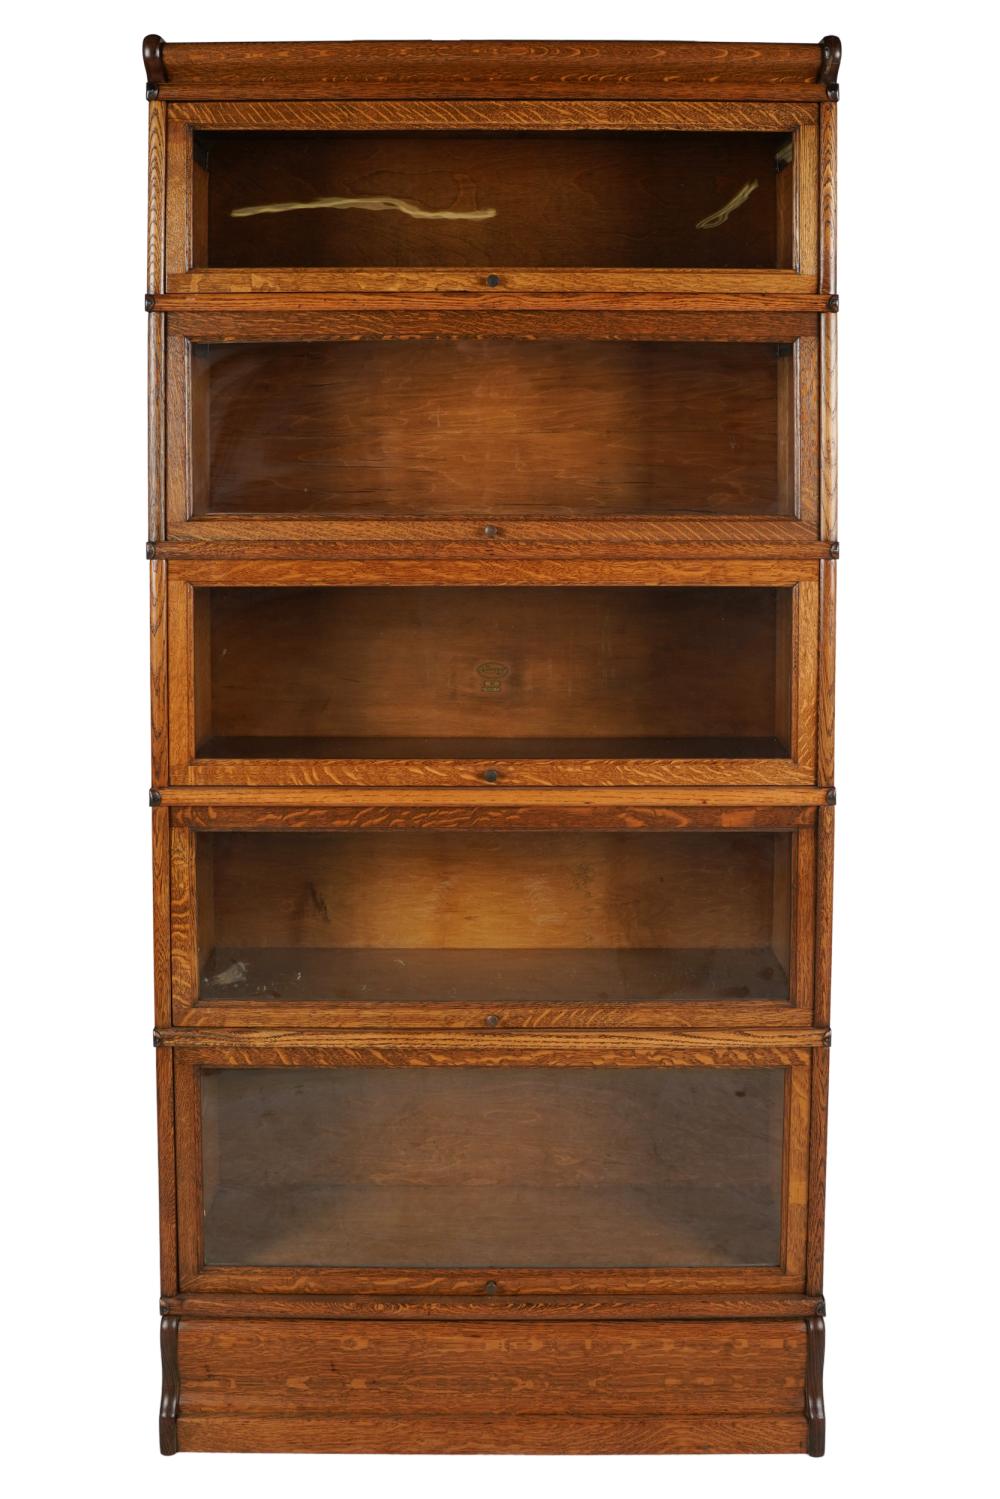 MACEY LAWYERS BOOKCASEwith five shelves,